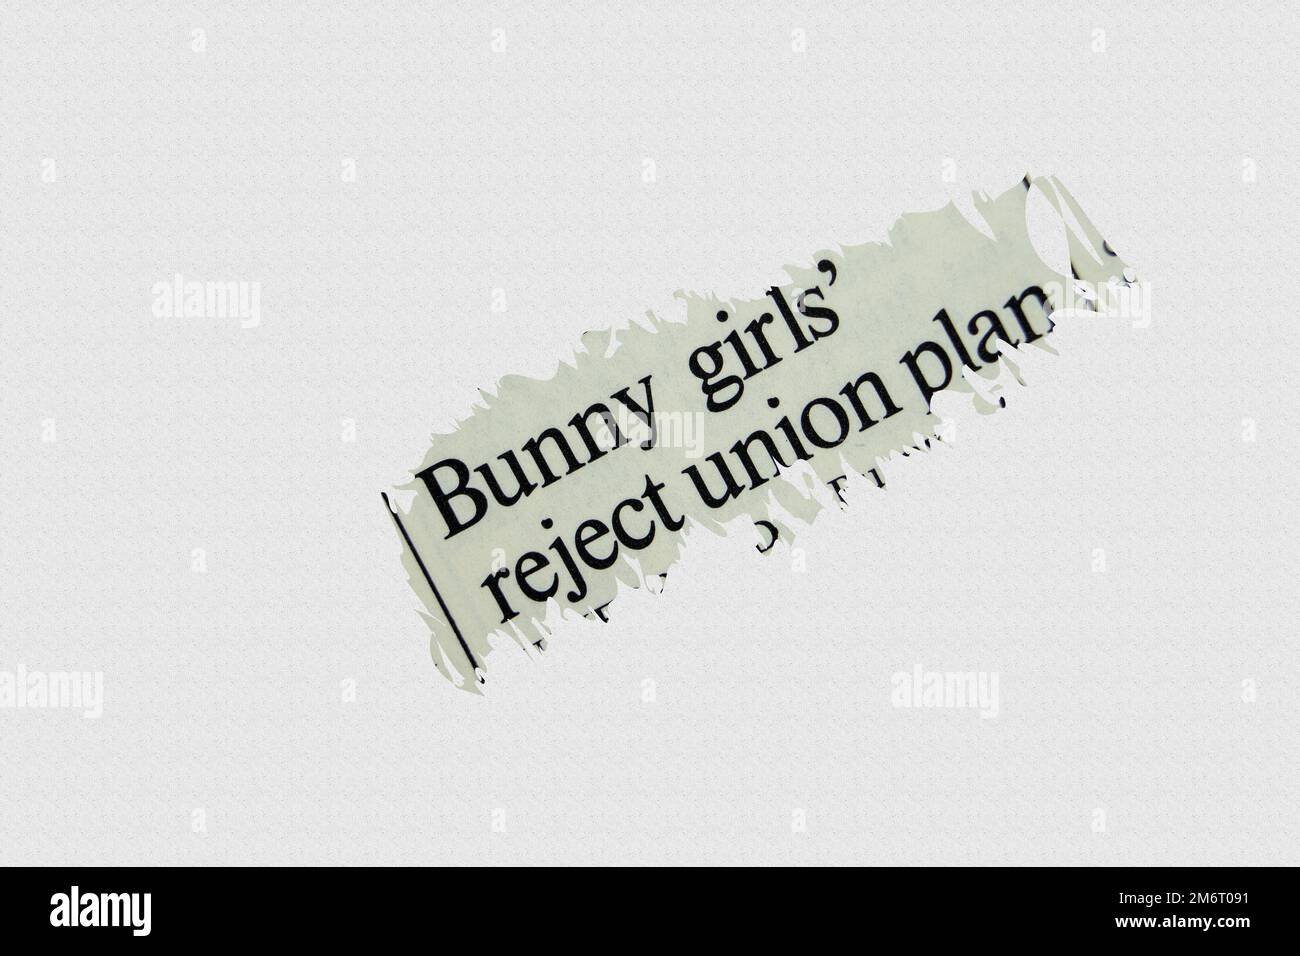 news story from 1975 newspaper headline article title - Bunny girls' reject union plan Stock Photo